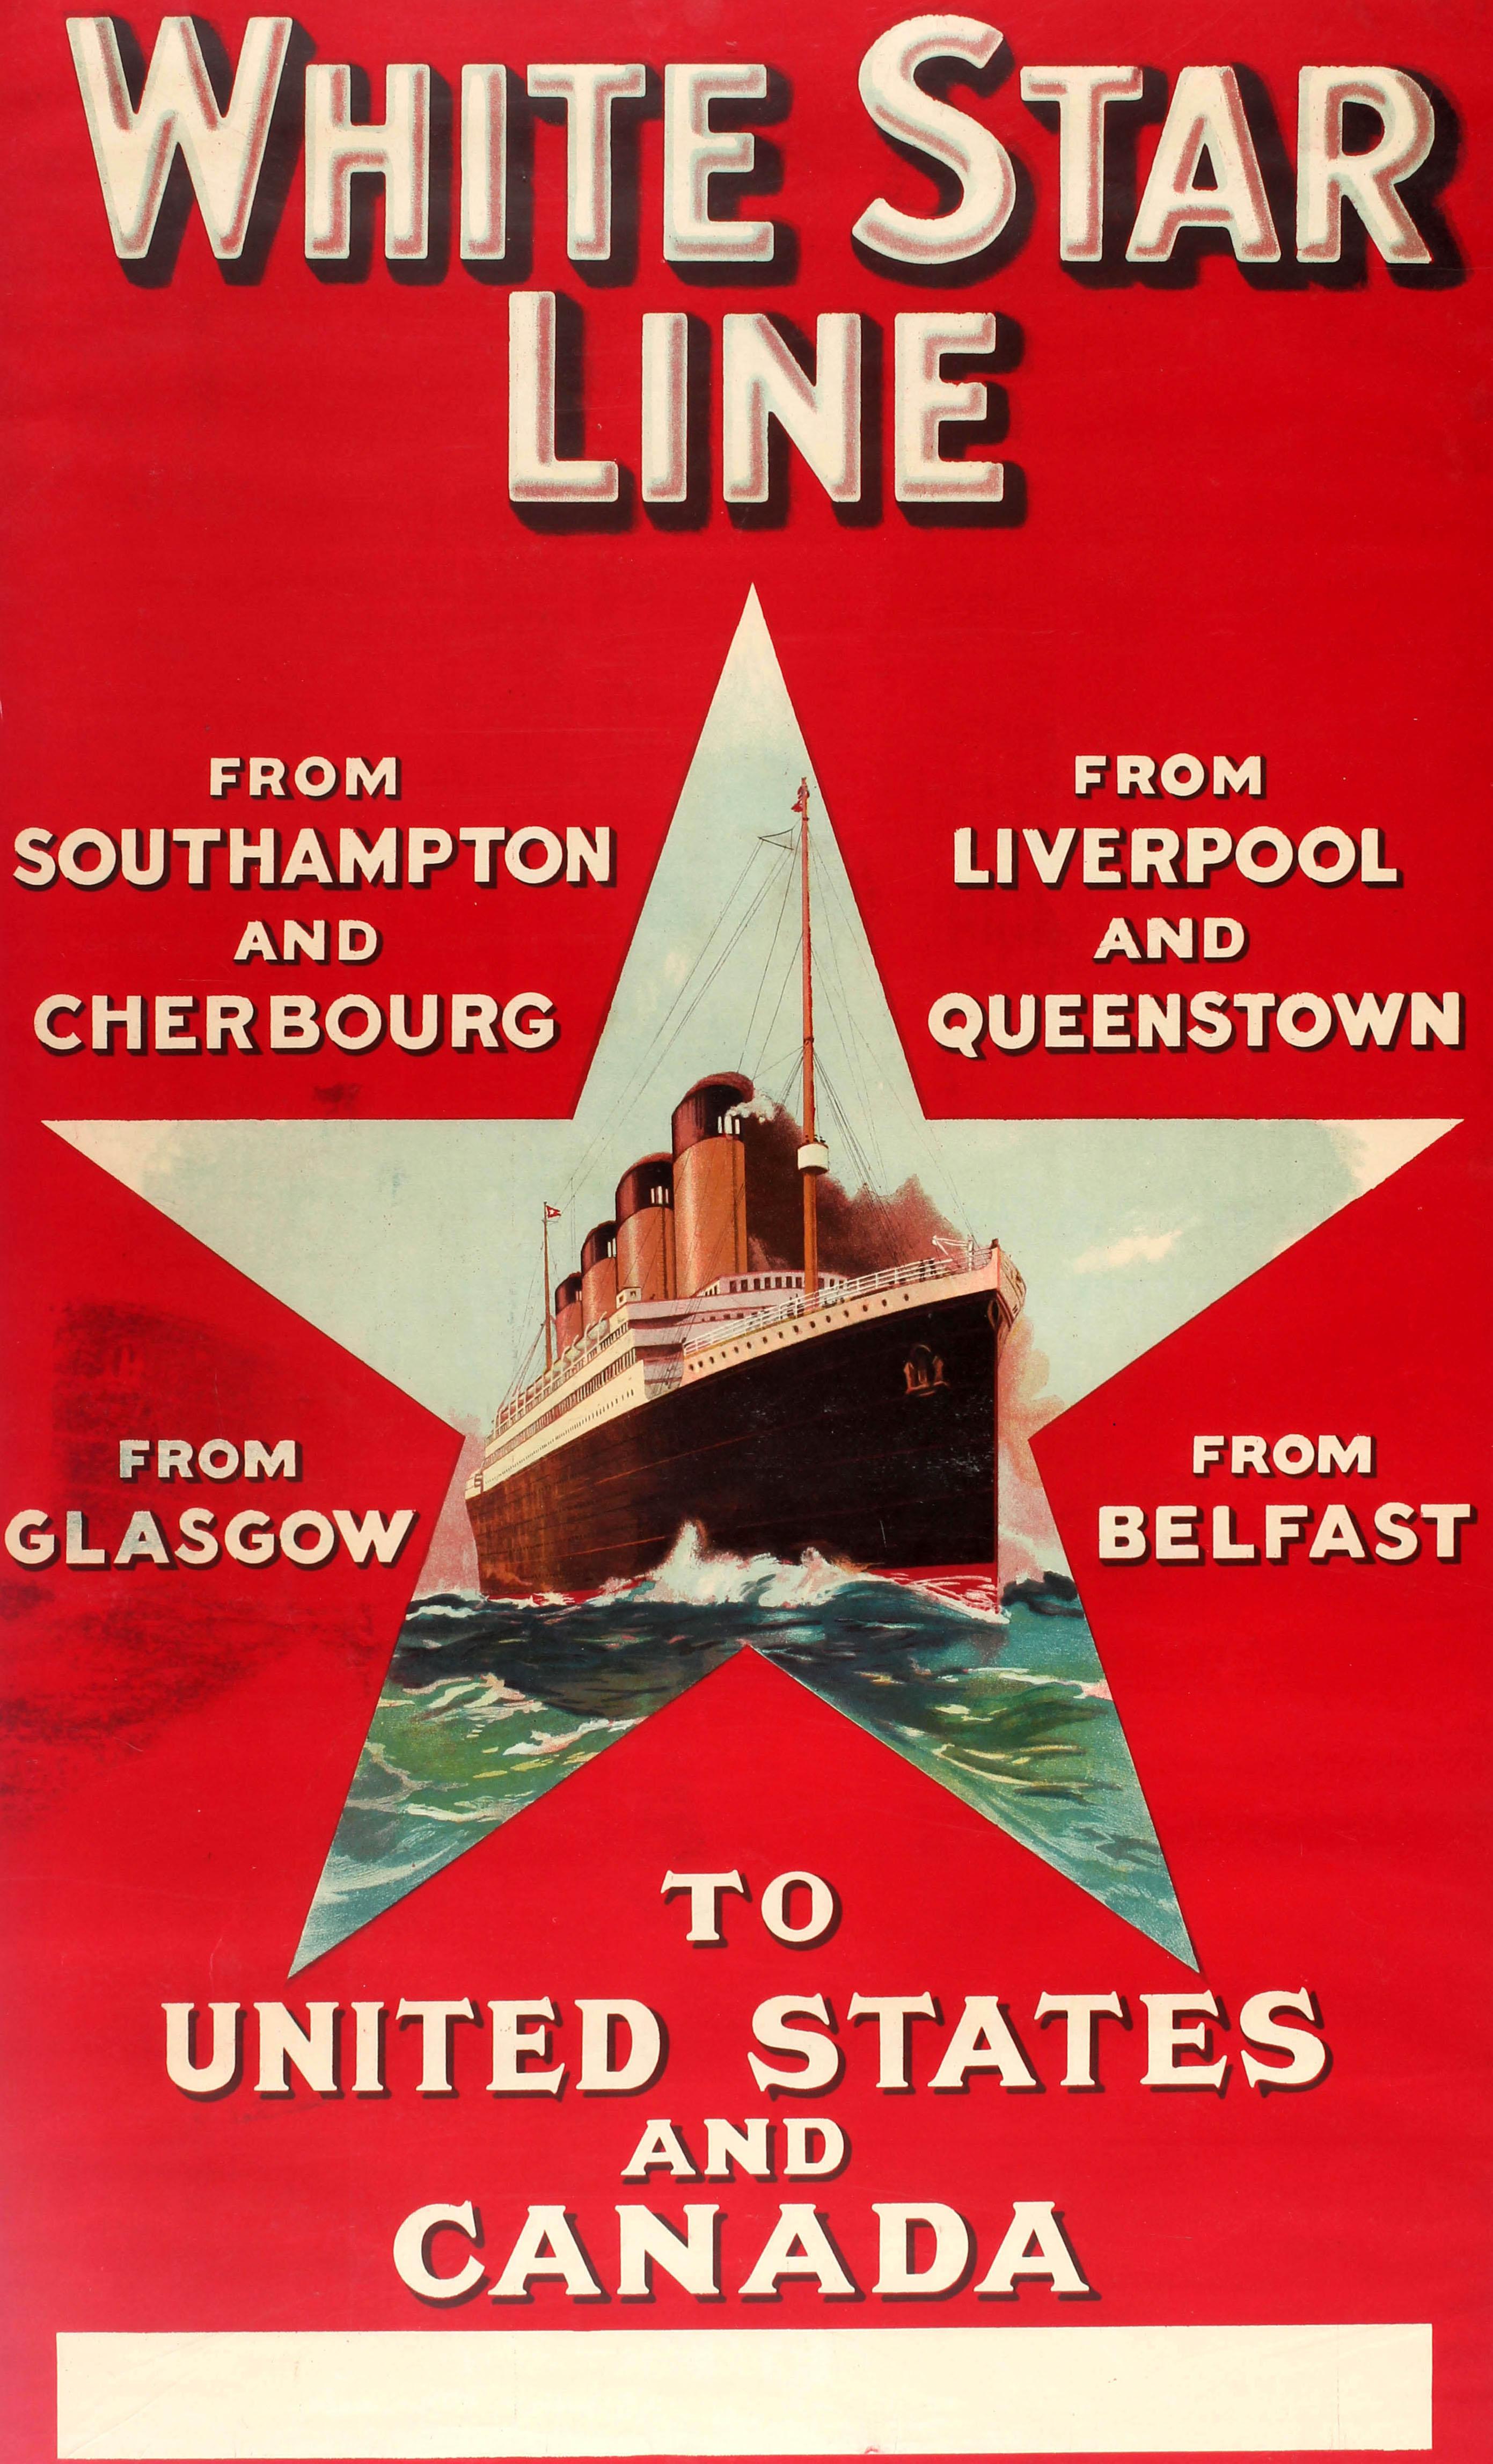 Original antique travel advertising poster for White Star Line From Southampton and Cherbourg From Liverpool and Queenstown From Glasgow From Belfast To United States and Canada featuring a great image of a four funnel RMS Olympic White Star Line